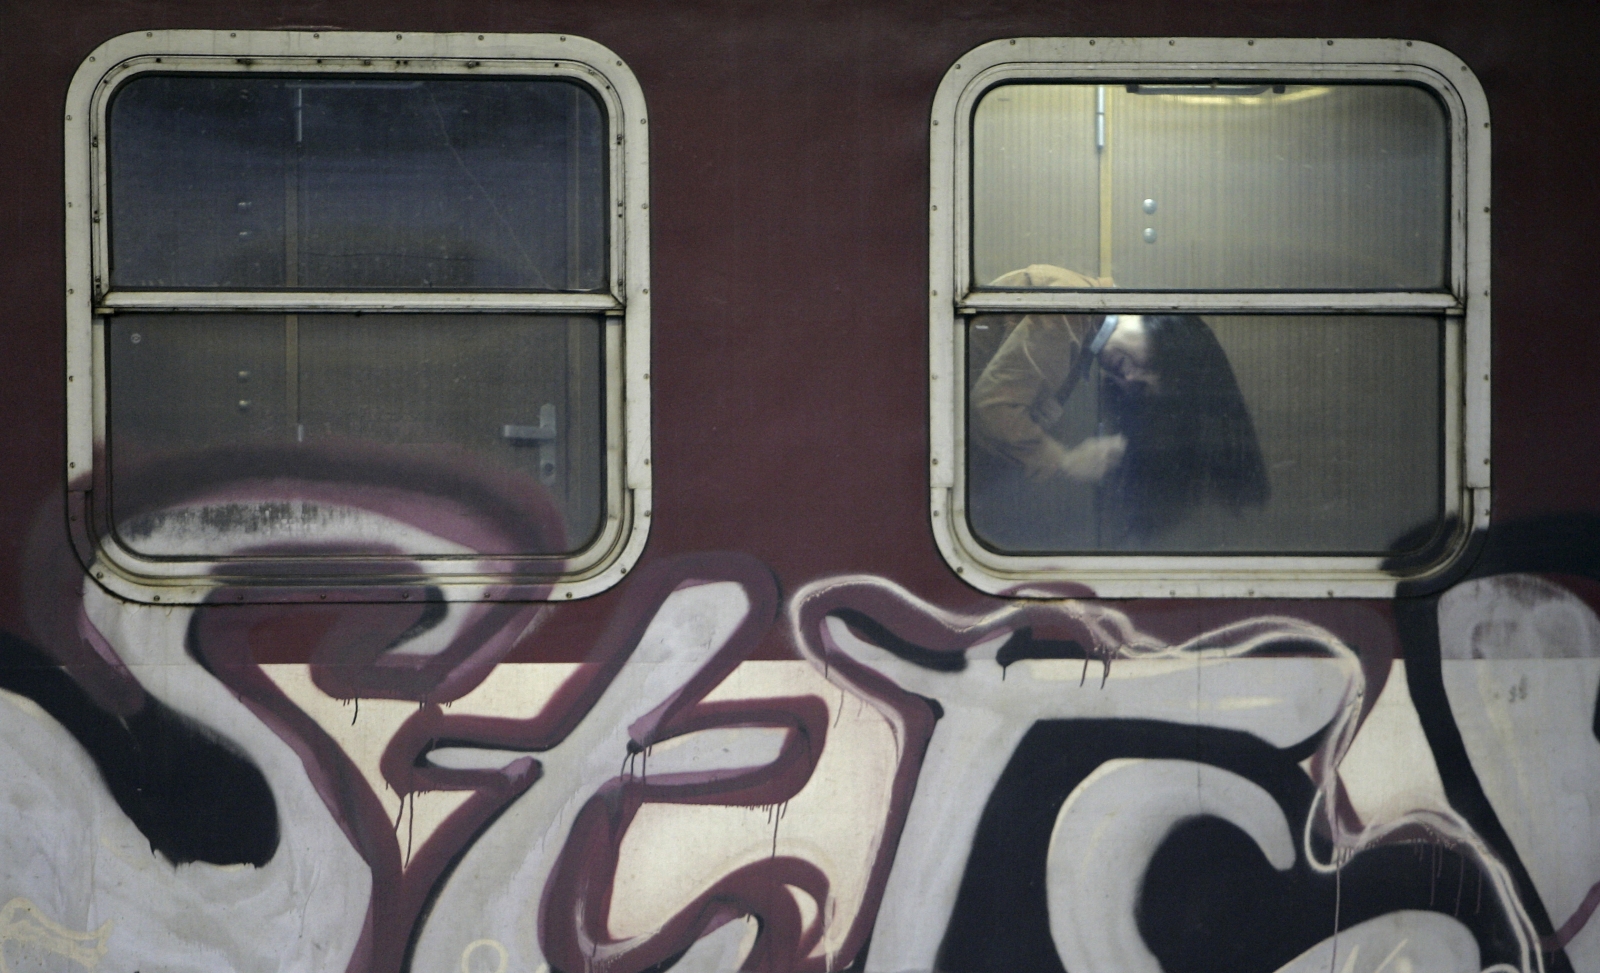 Graffiti Artist Burnt To Death Trying to 'Tag' Trains at Australian